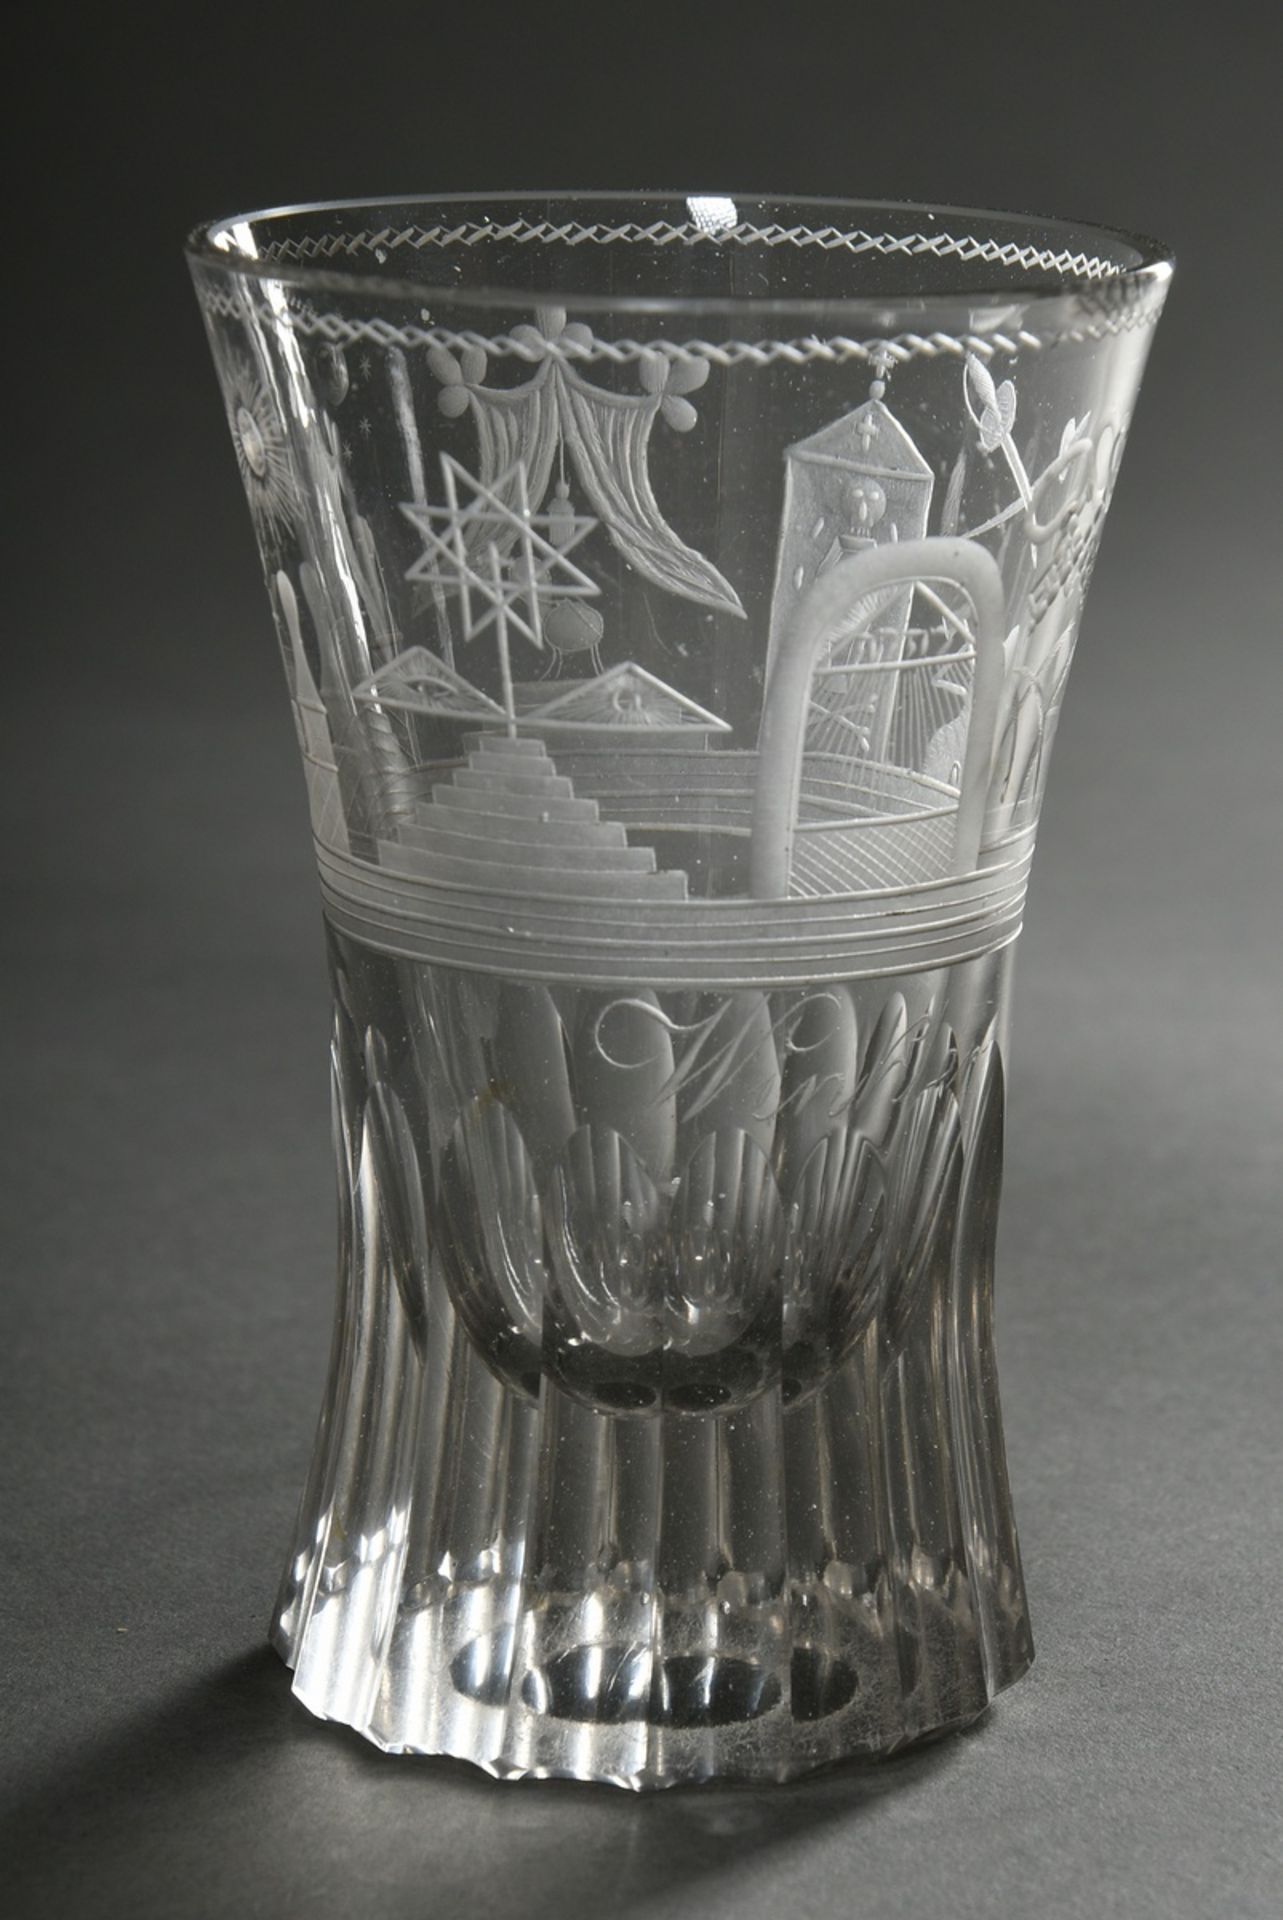 Masonic glass with surrounding border, rich mat and blank cut symbolism as well as 16-pass notch fa - Image 3 of 5